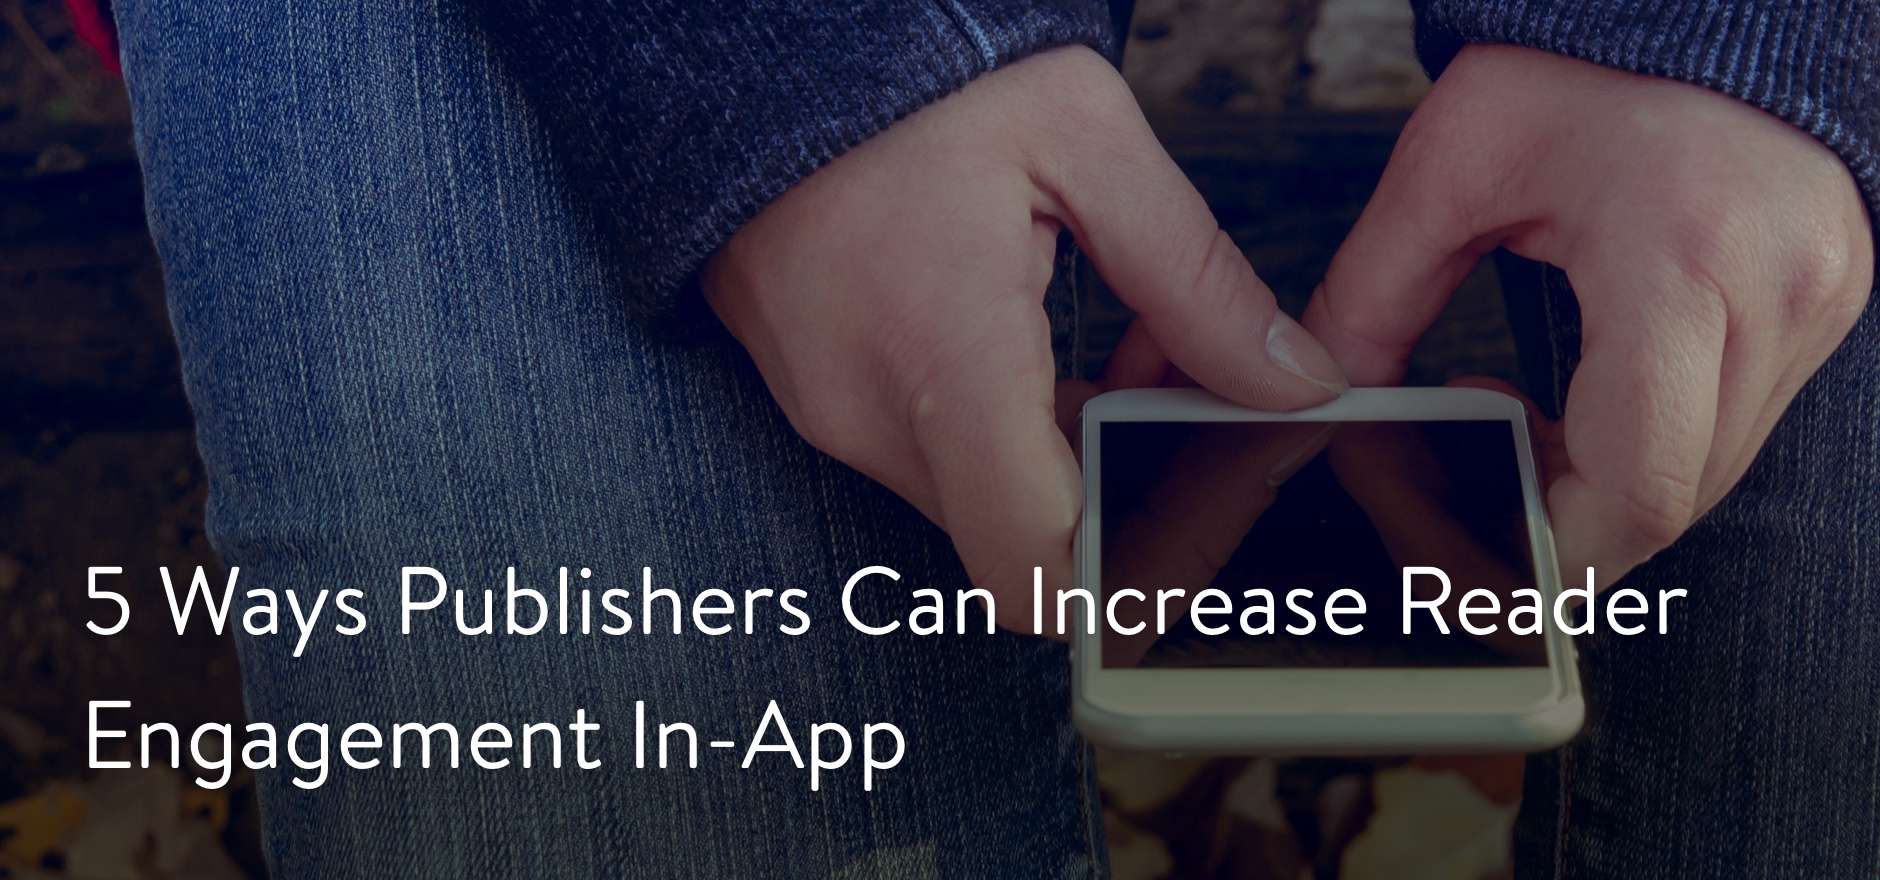 How To Increase Reader Engagement: 5 Tips For Publishers